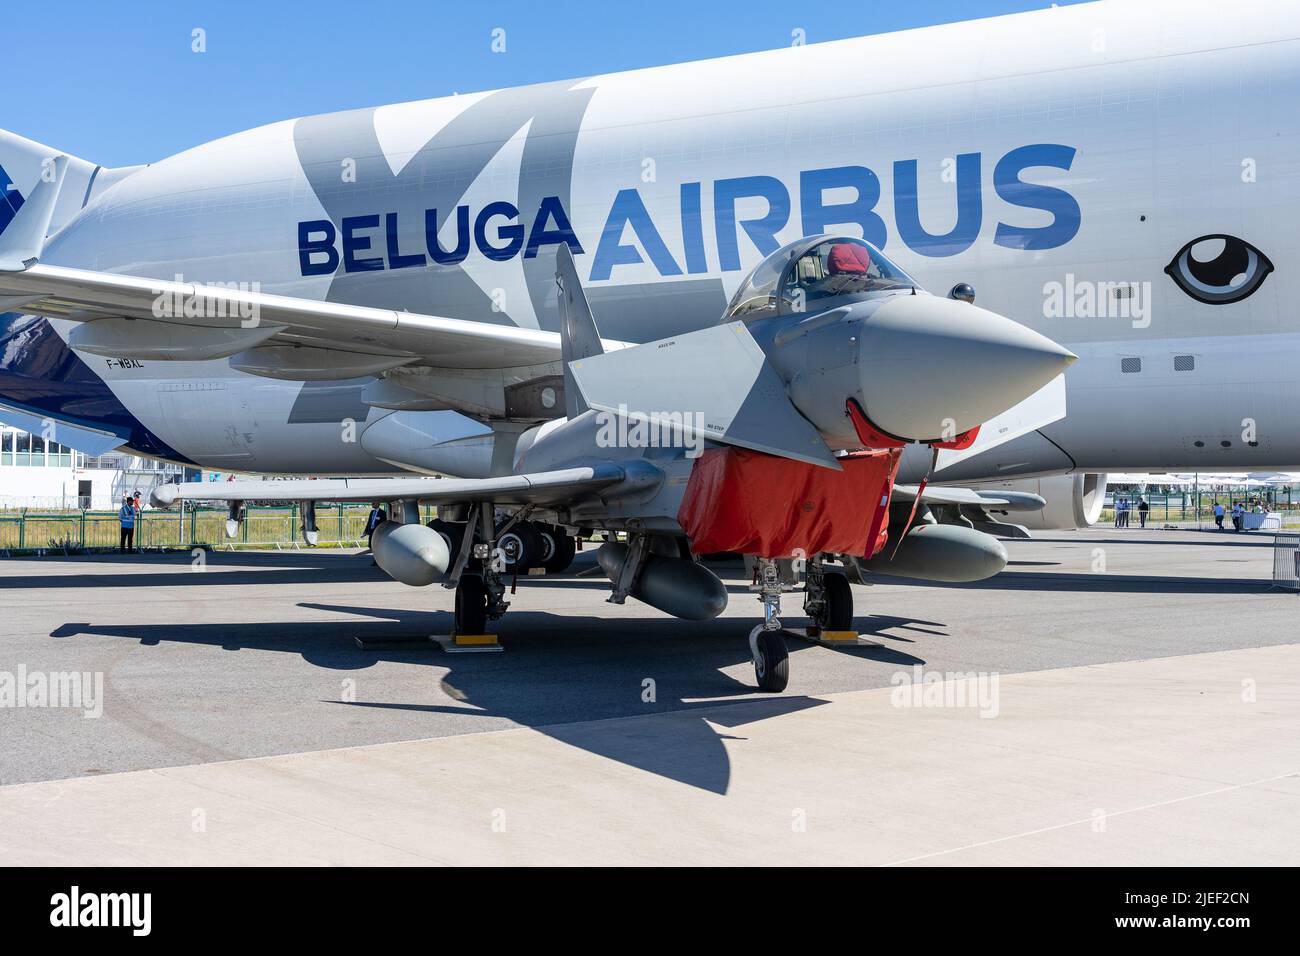 Twin-engine, canard delta wing, multirole fighter Eurofighter Typhoon against the backdrop of an Airbus A300-600ST Beluga. Stock Photo